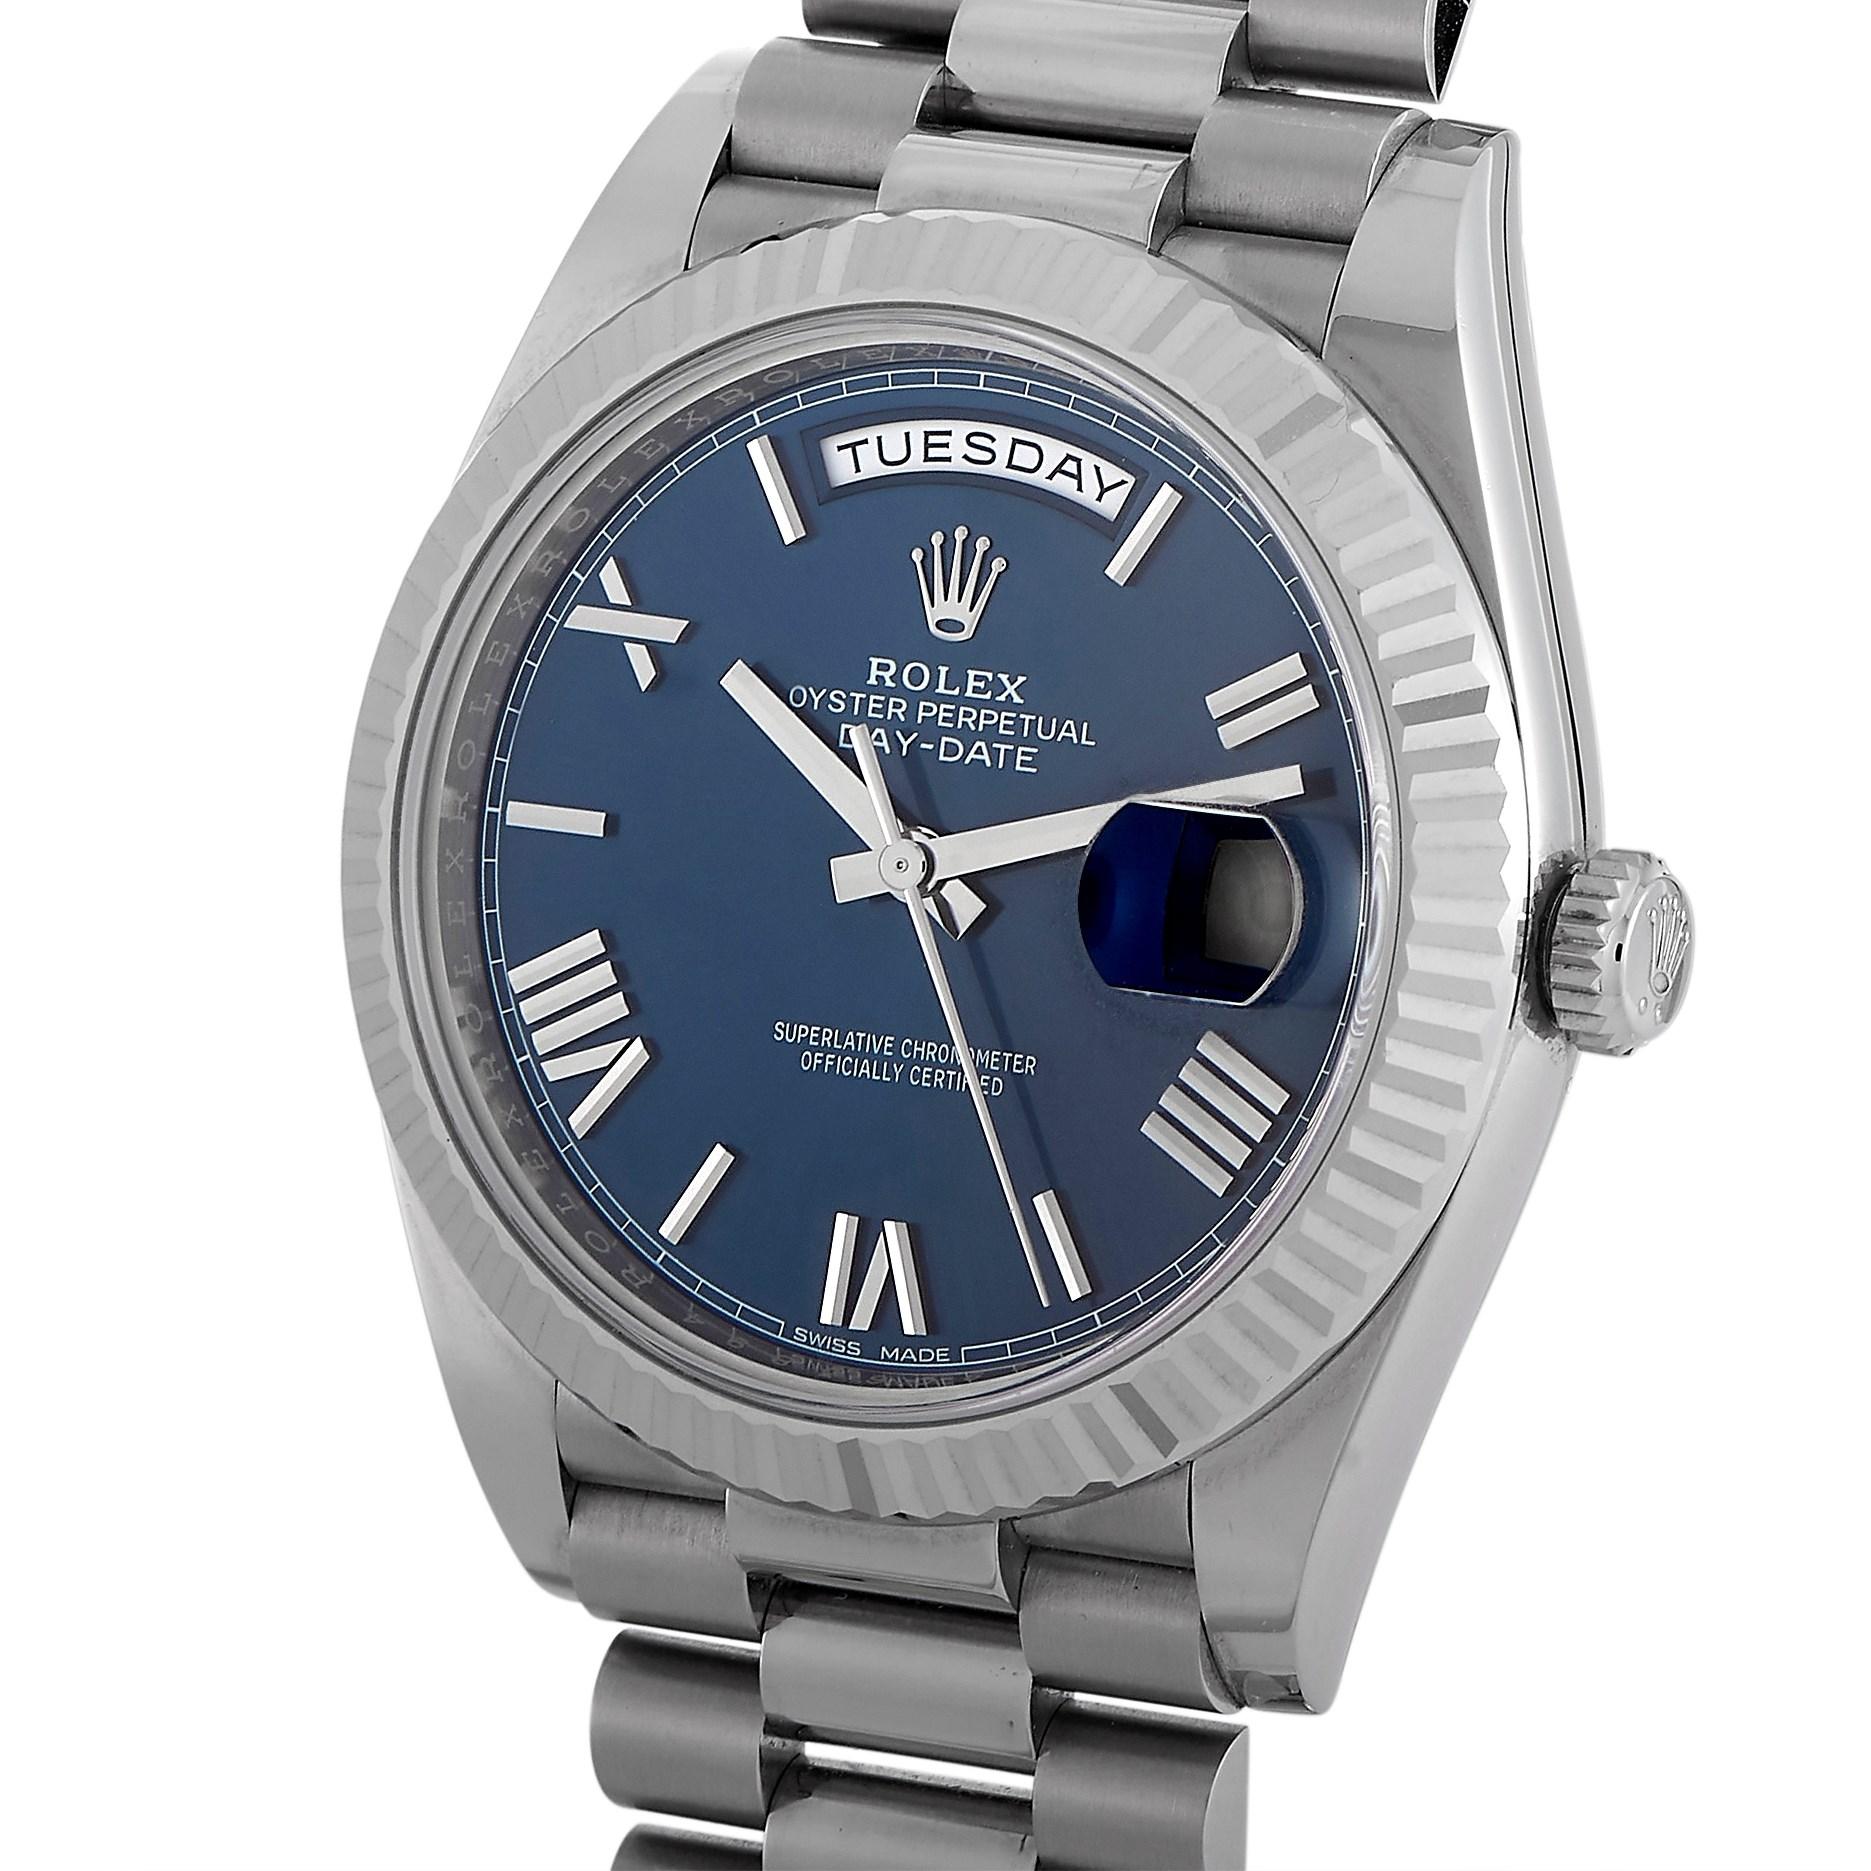 A masculine gold watch with a statement-making simplicity. The Rolex Day-Date 40 18K White Gold President Blue Dial Automatic Men's Watch 228239BLRP attracts eyes without having to look bold. it features a 40mm polished 18K white gold case and an